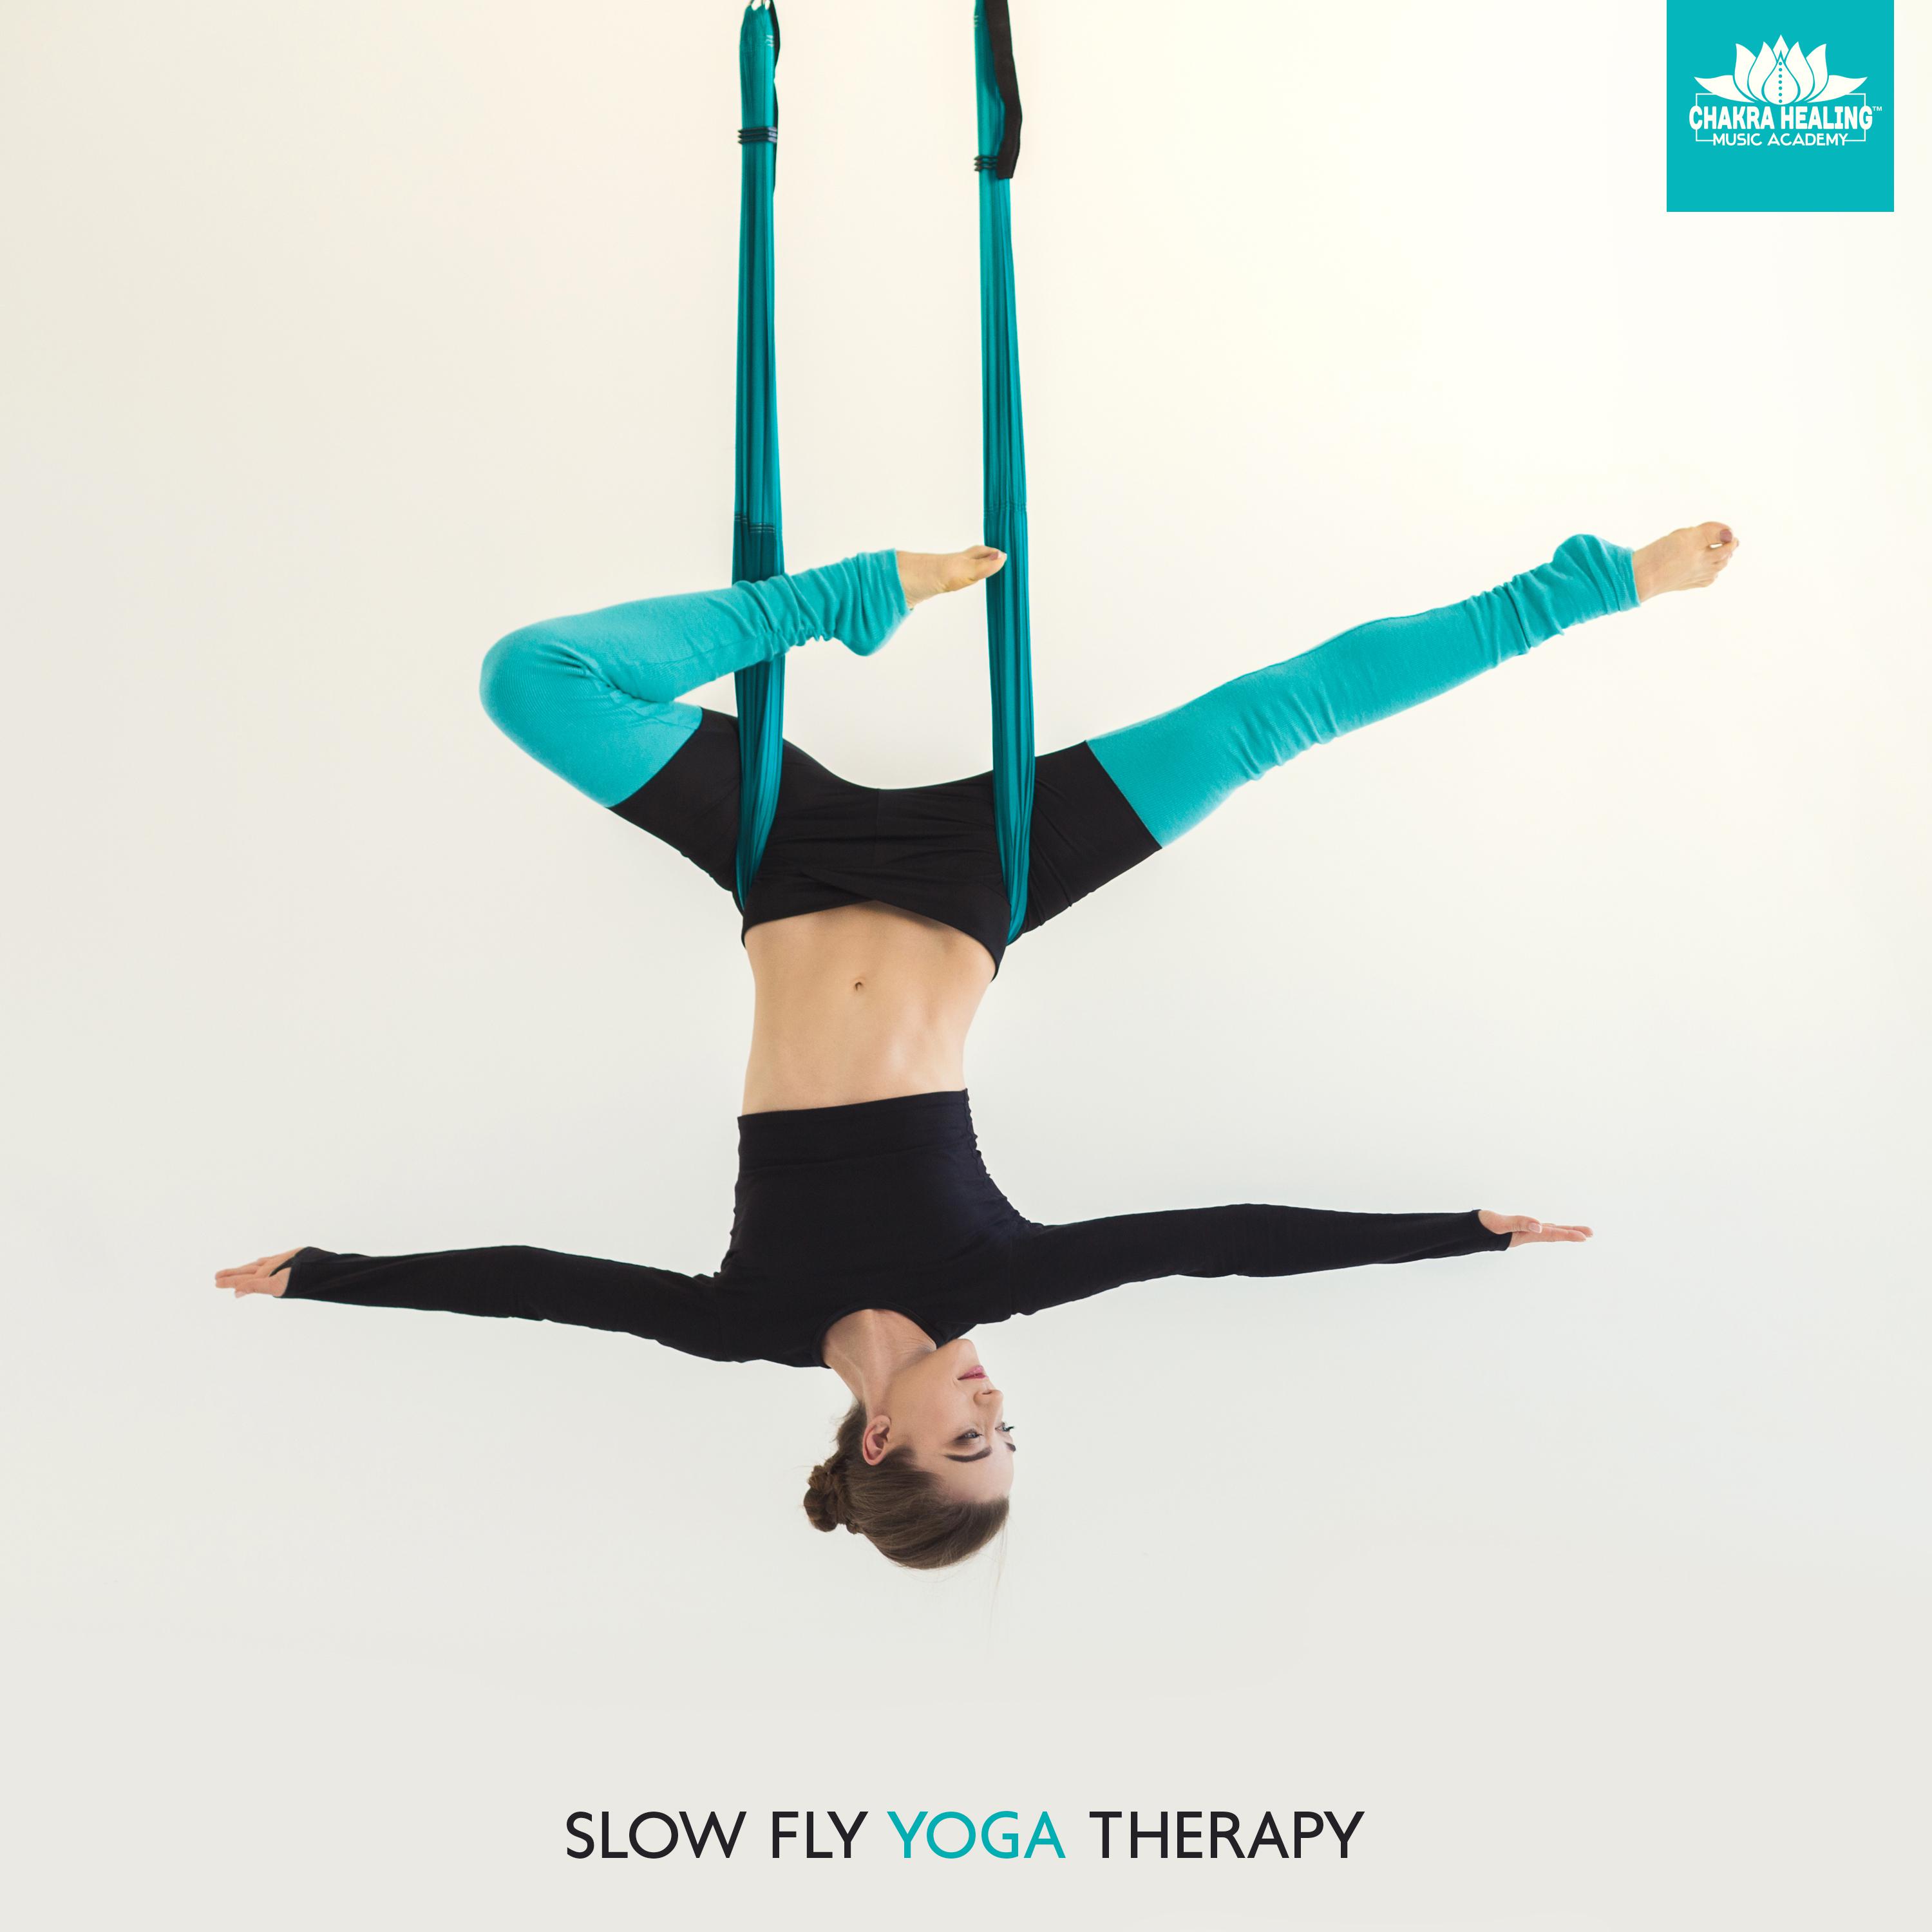 Slow Fly Yoga Therapy